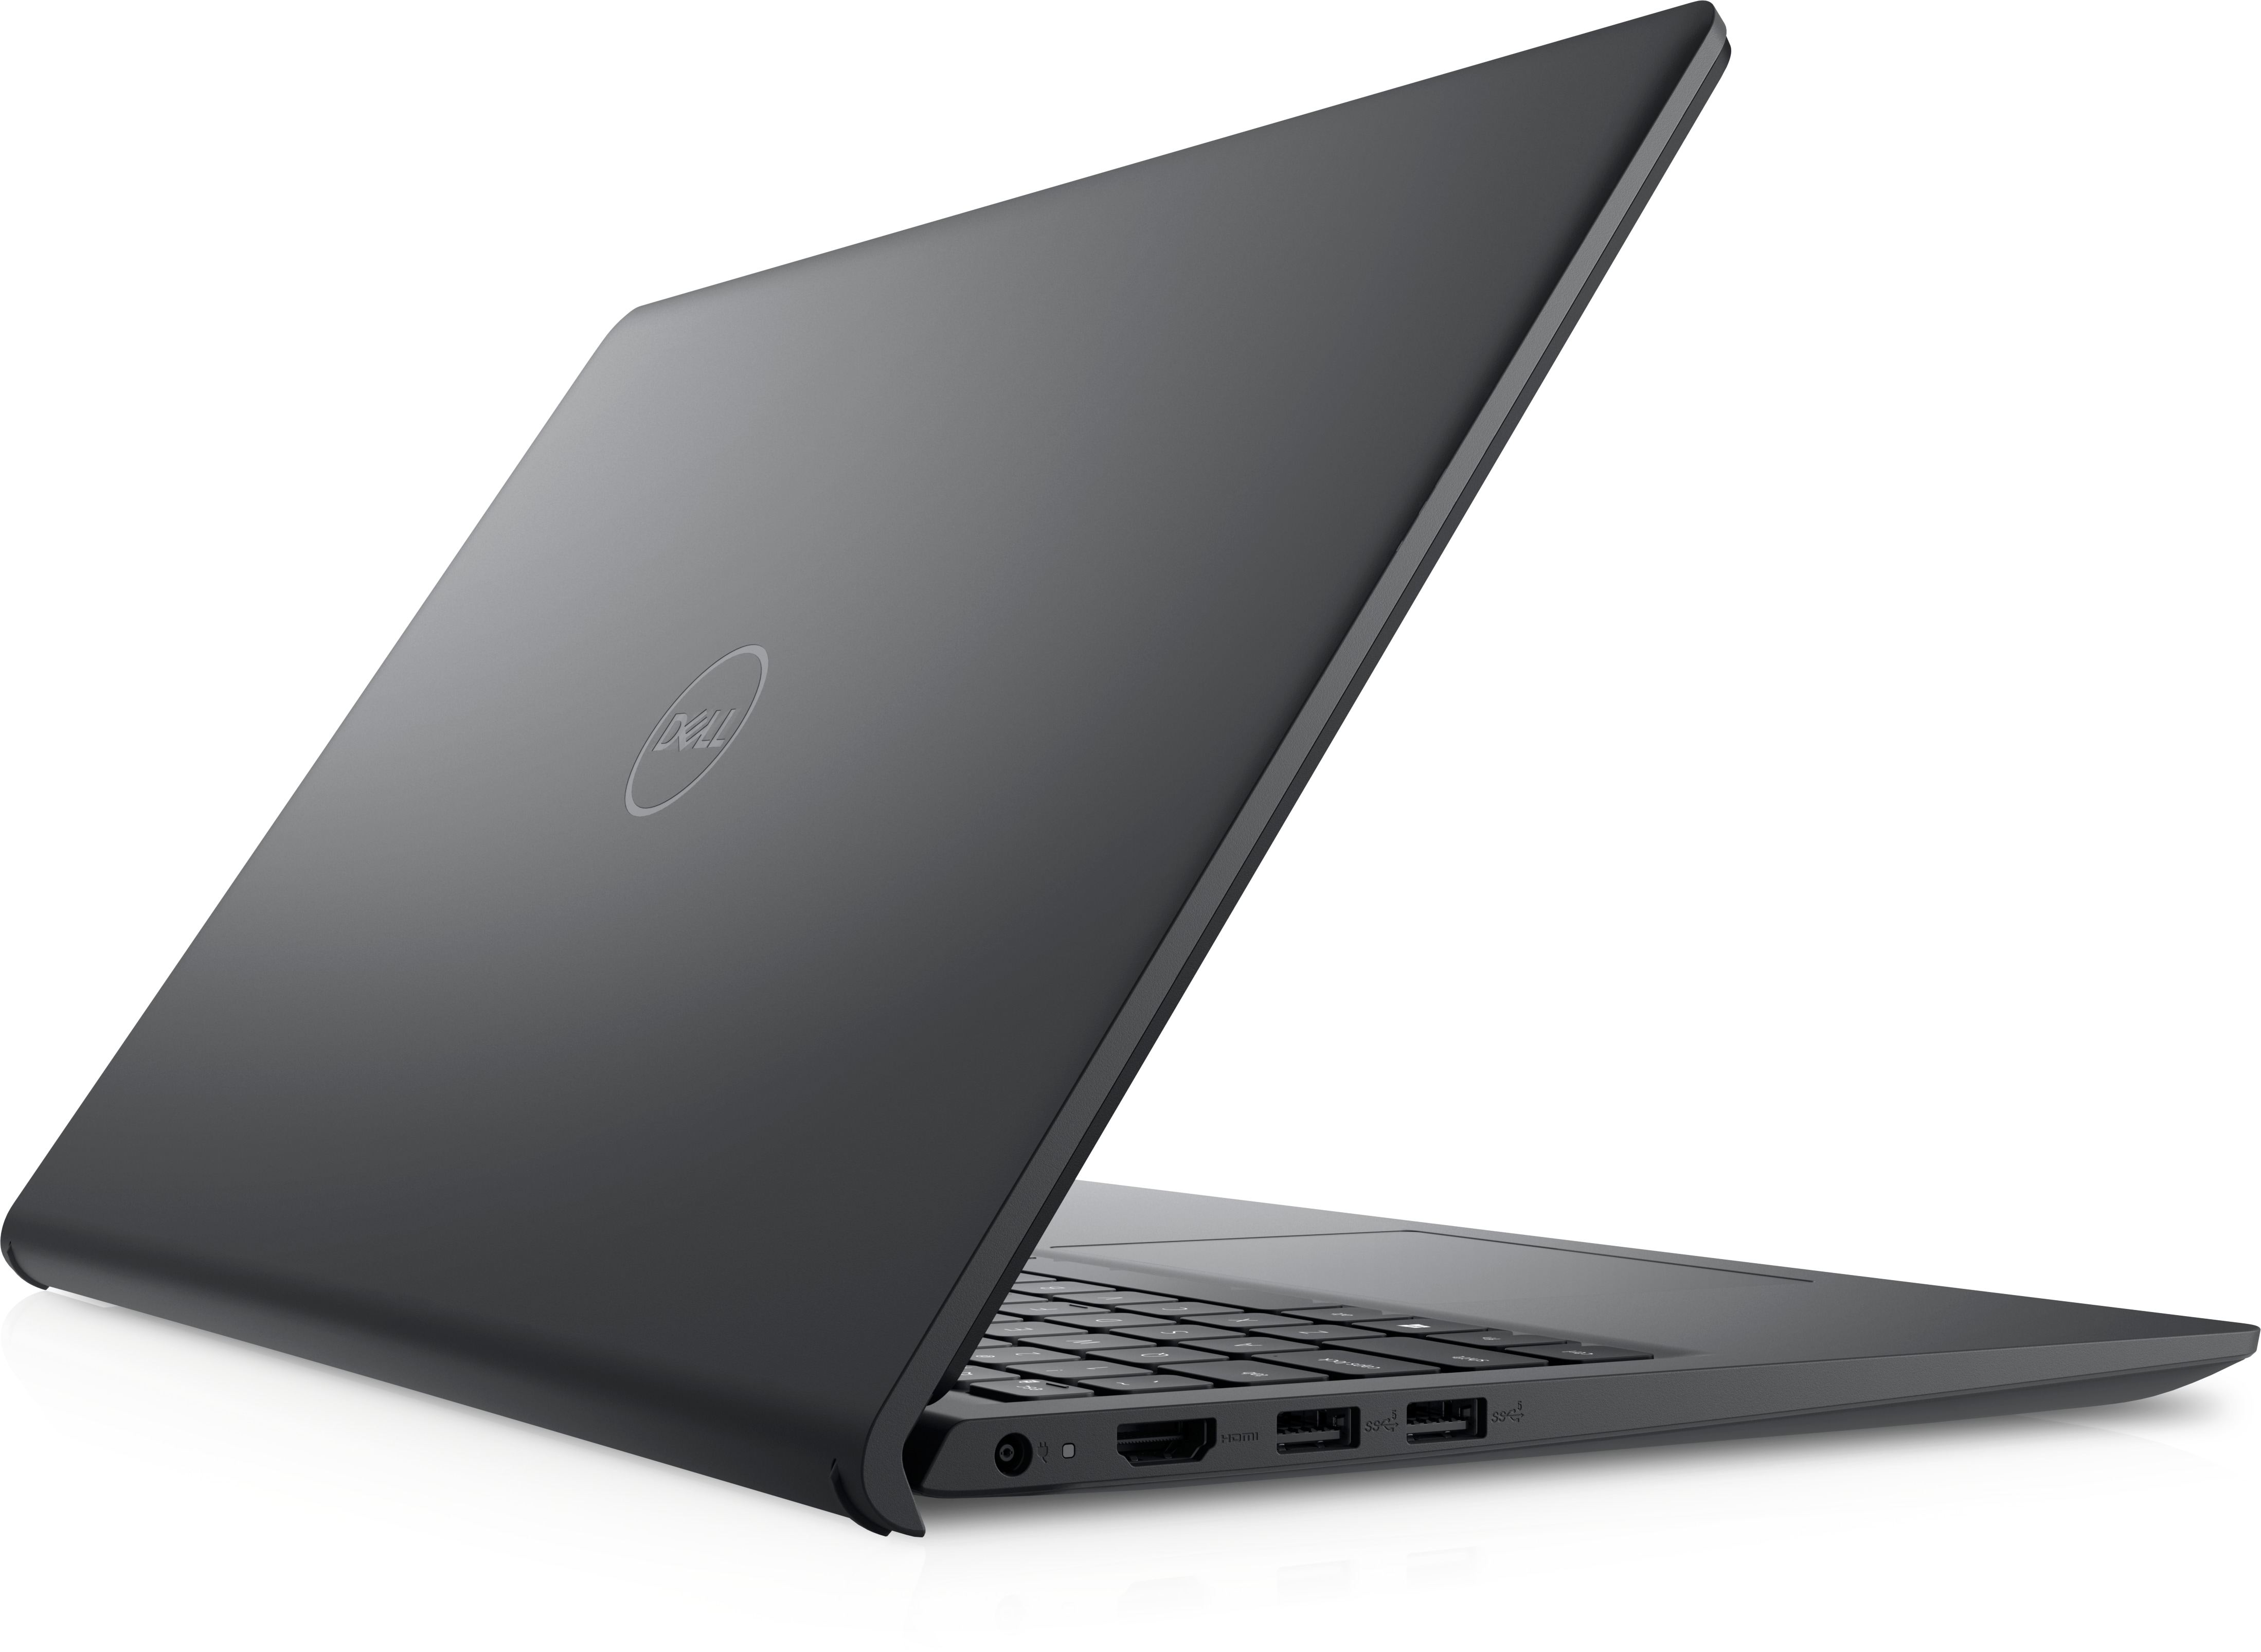 Inspiron 3525 15 Inch Laptop (AMD) : Inspiron Laptops | Dell India